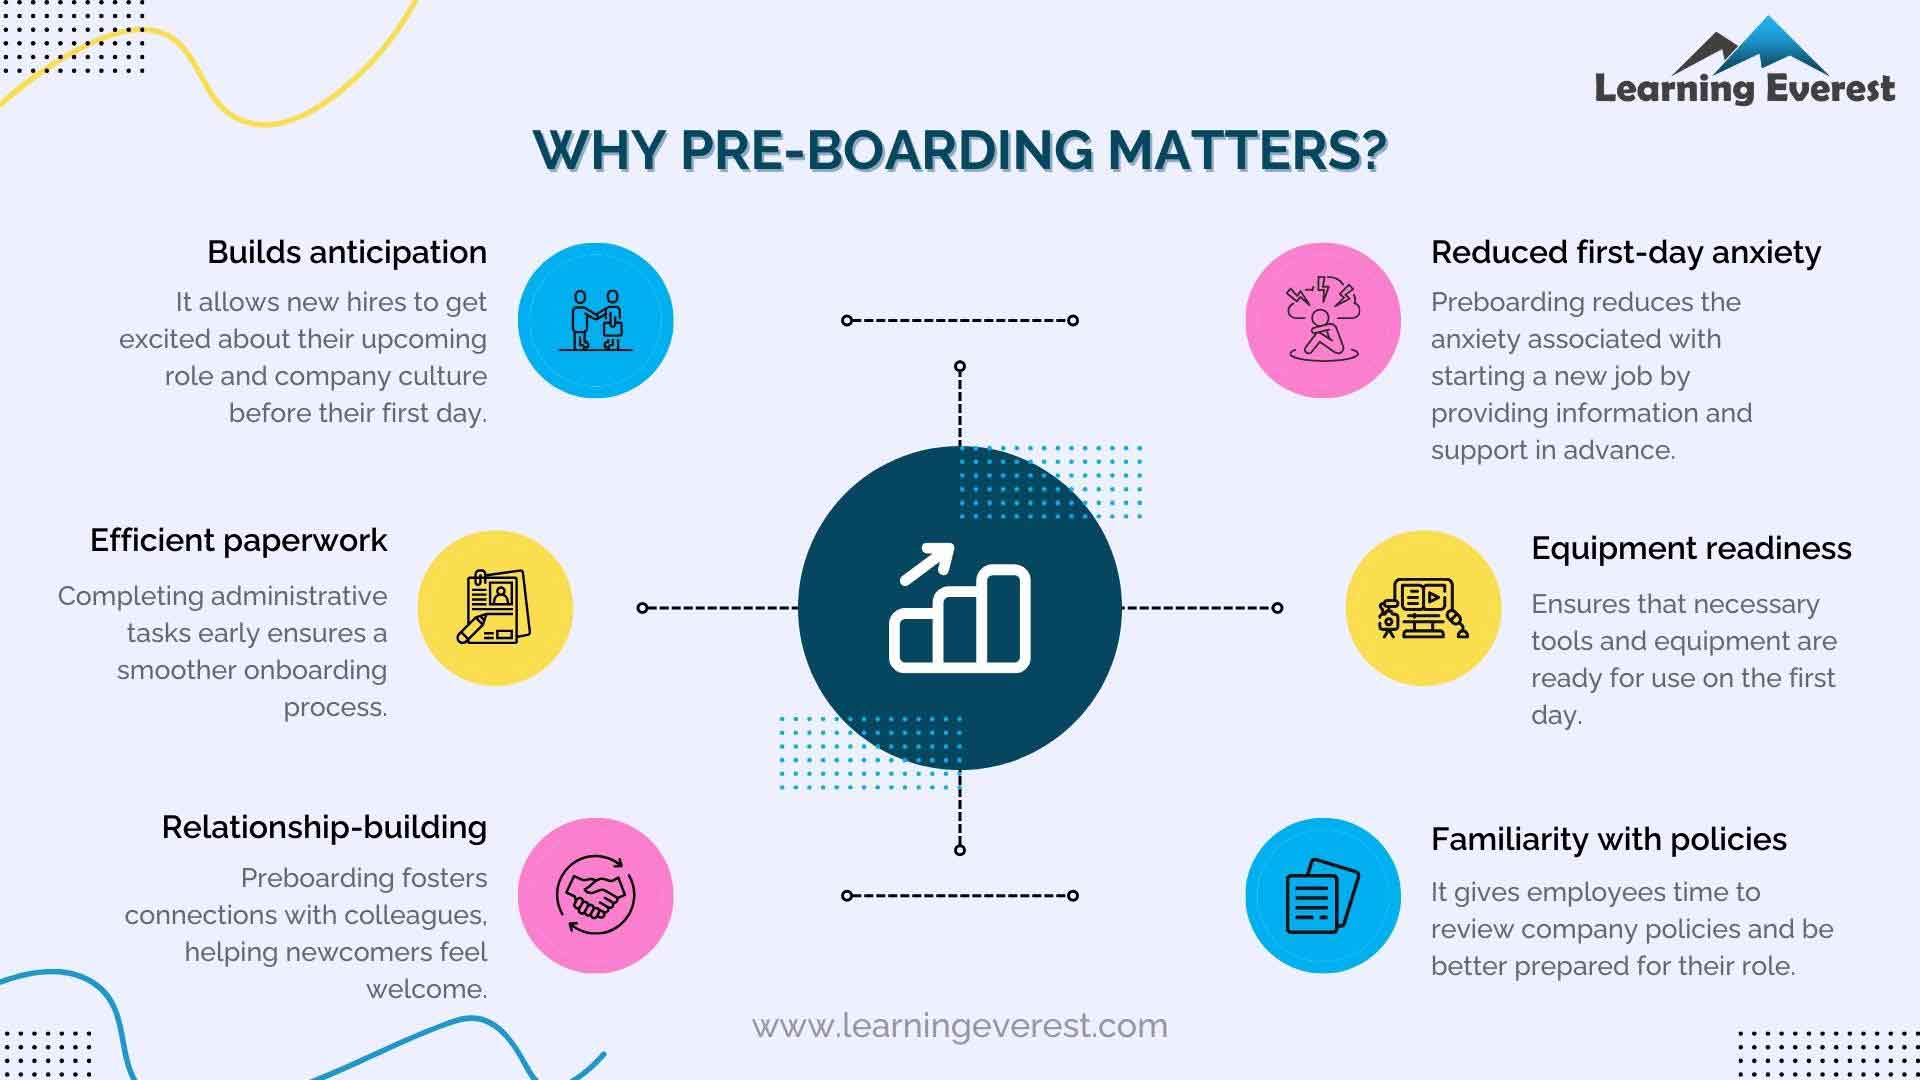 Phases of Employee Onboarding - Pre boarding